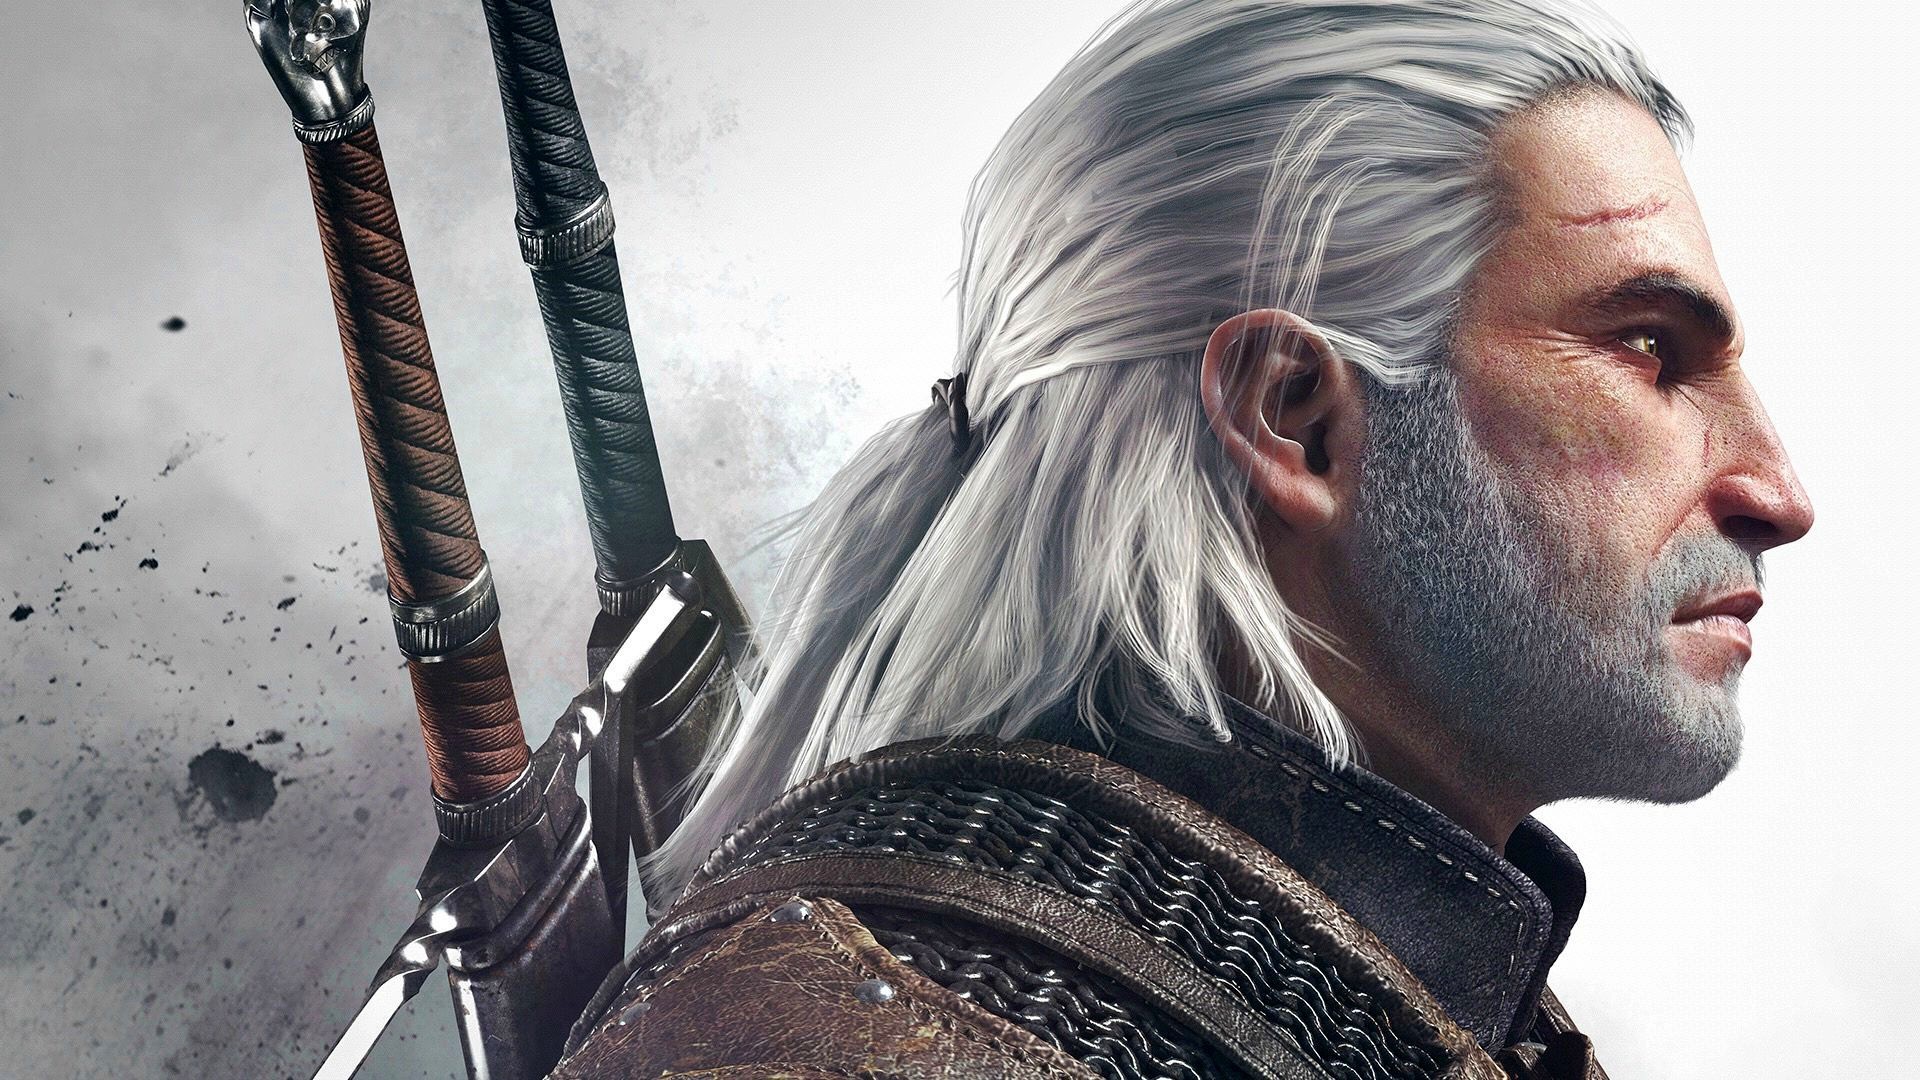 Video Game – The Witcher 3: Wild Hunt Geralt of Rivia Wallpaper